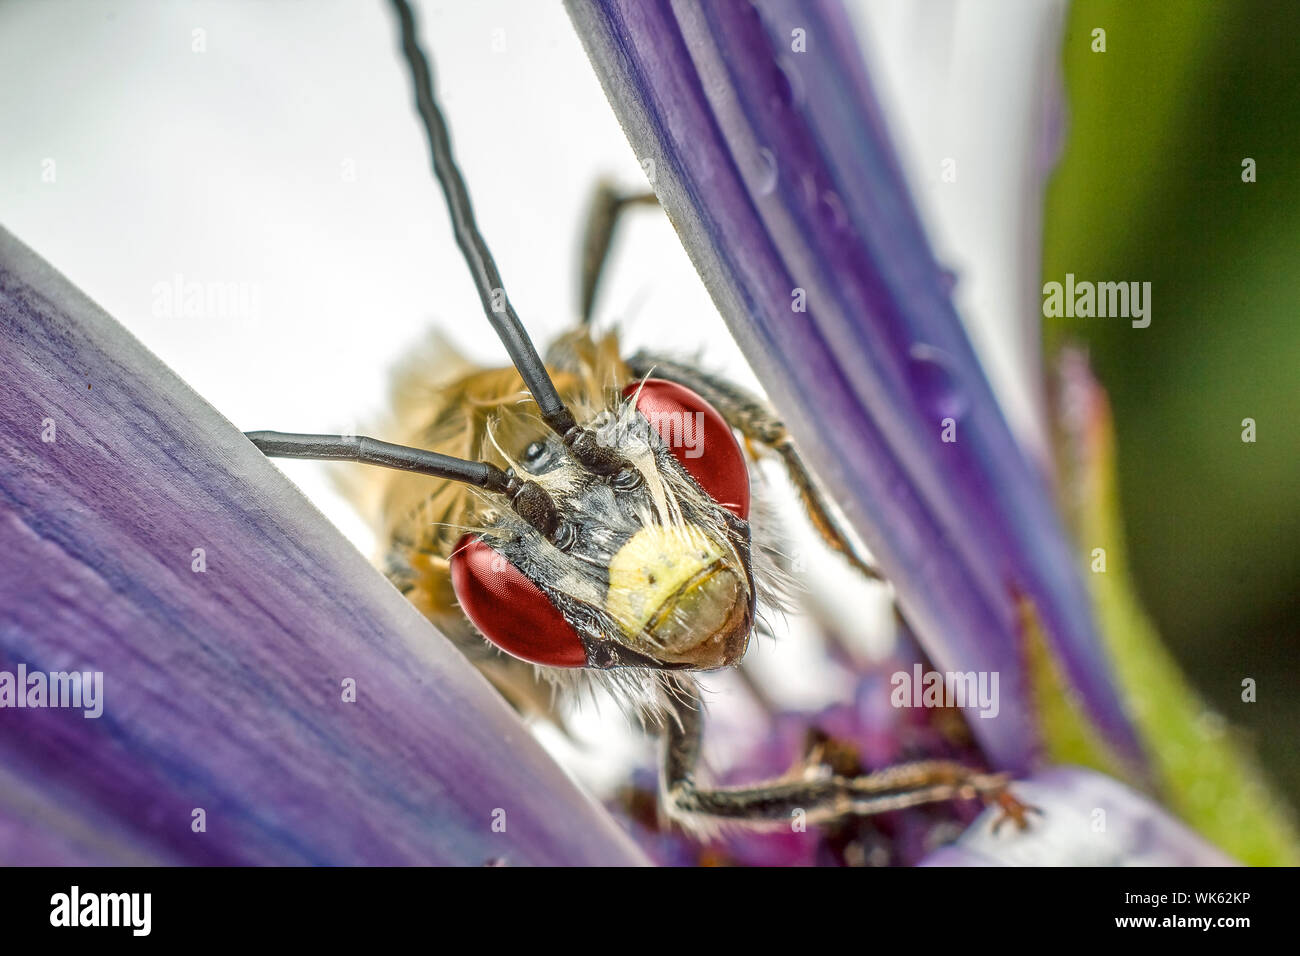 Beautiful insect in high magnification over a purple flower Stock Photo